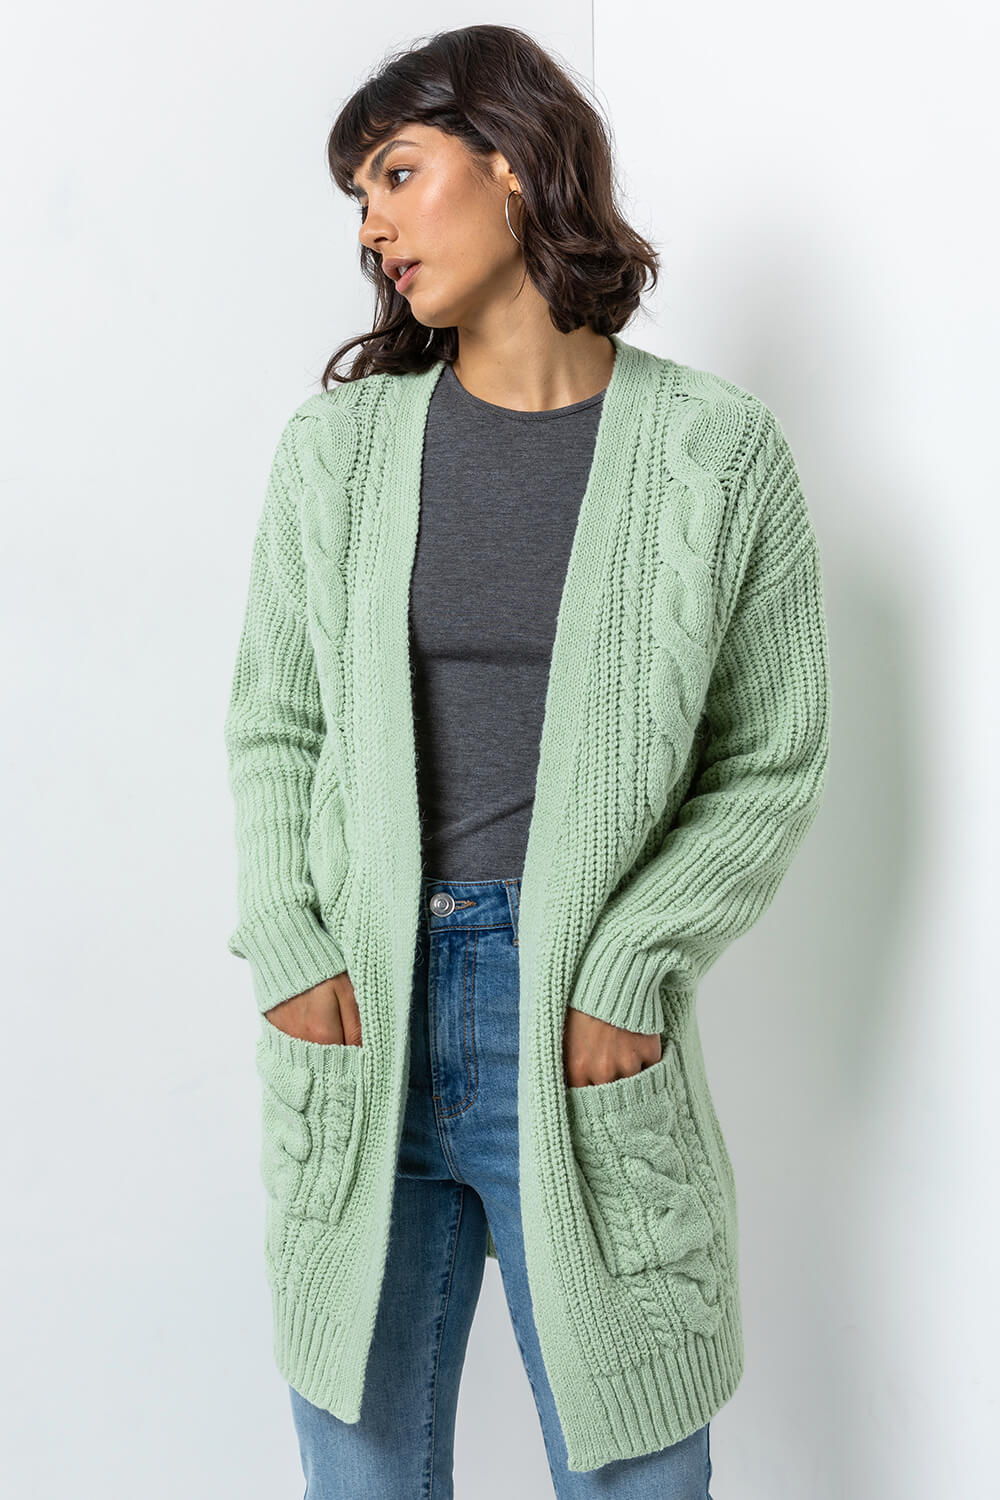 Mint Cable Knit Longline Cardigan, Image 5 of 5